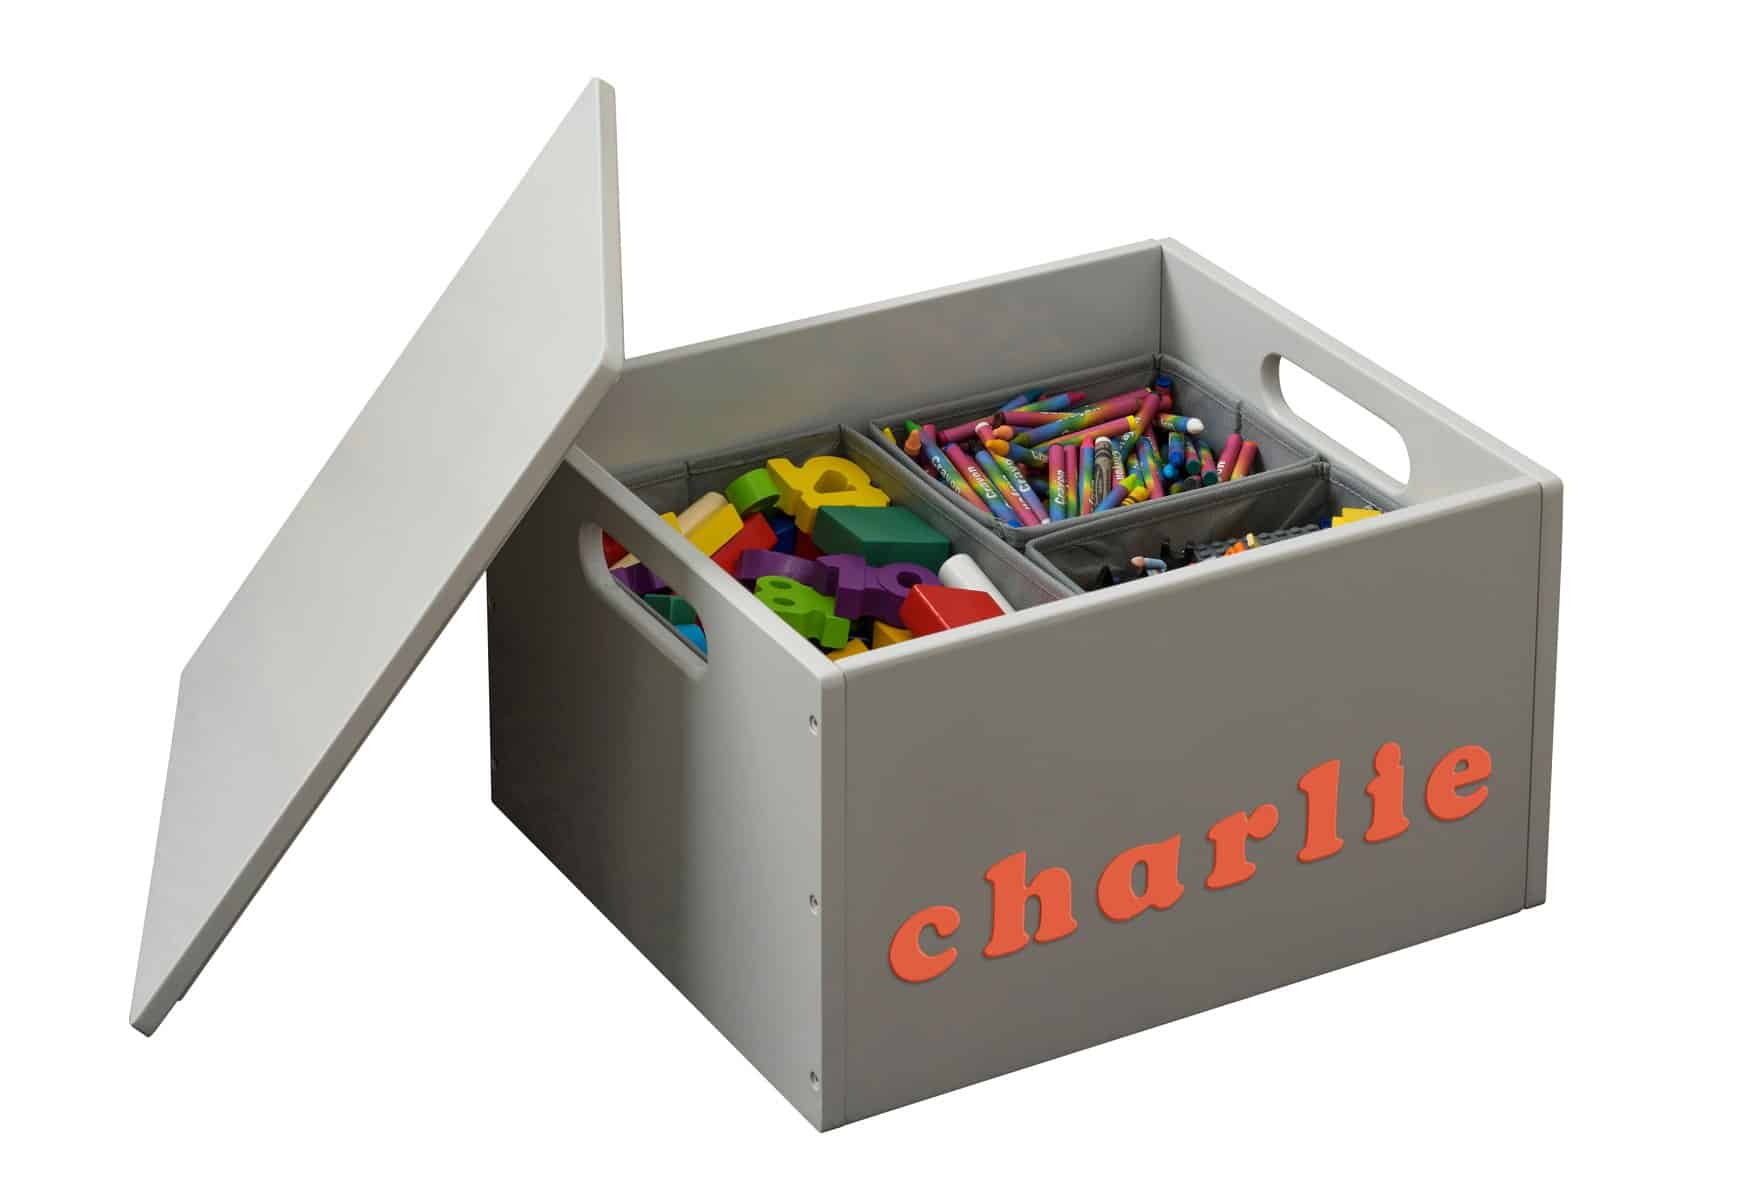 Personalised Wooden Toy Box – the Tidy Books Sorting Box